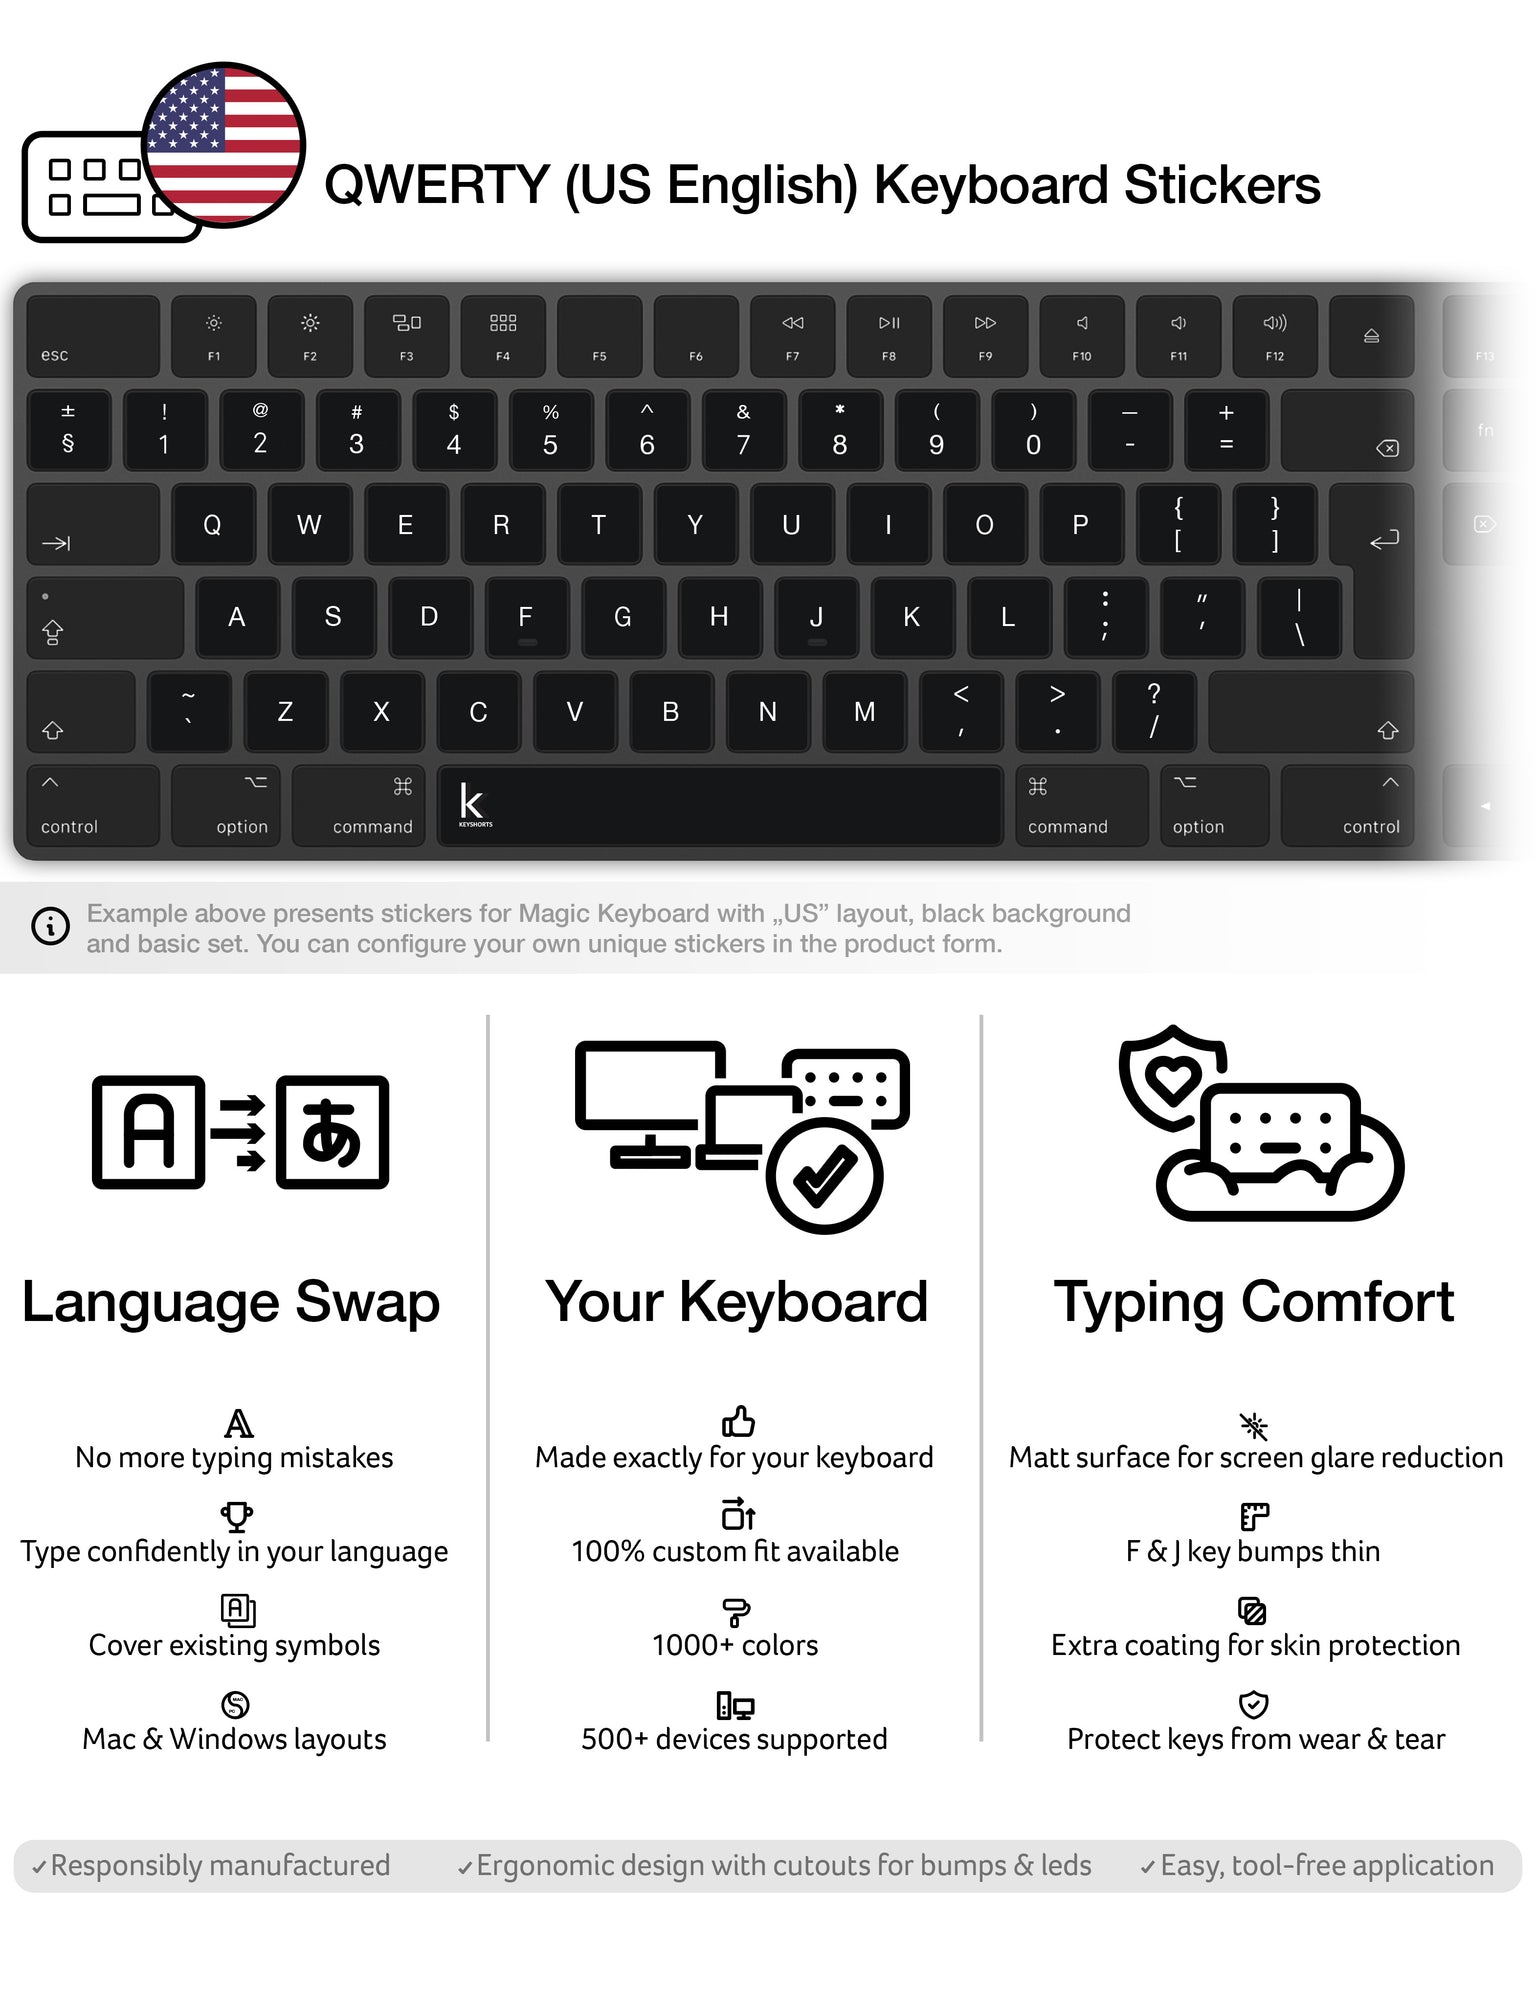 English Keyboard Stickers[5 in 1],Replacement English Keyboard Sticker with  White Font on Black Background Universal for Laptop Desktop Computer,Matte